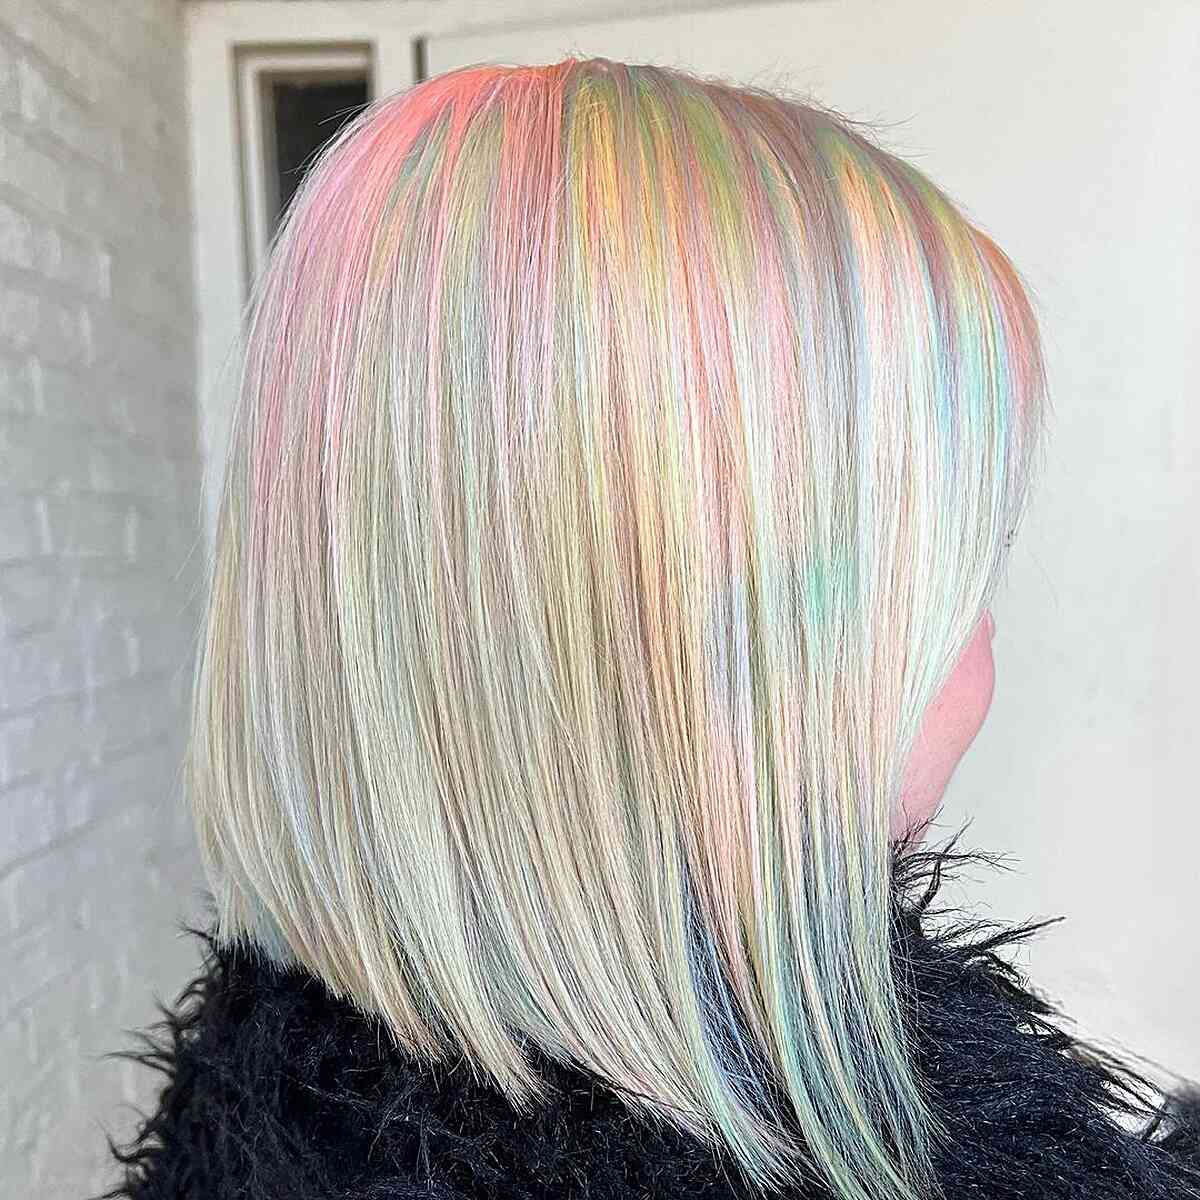 Light Blonde Neck-Length Hair with Hints of Cotton Candy Pink and Green